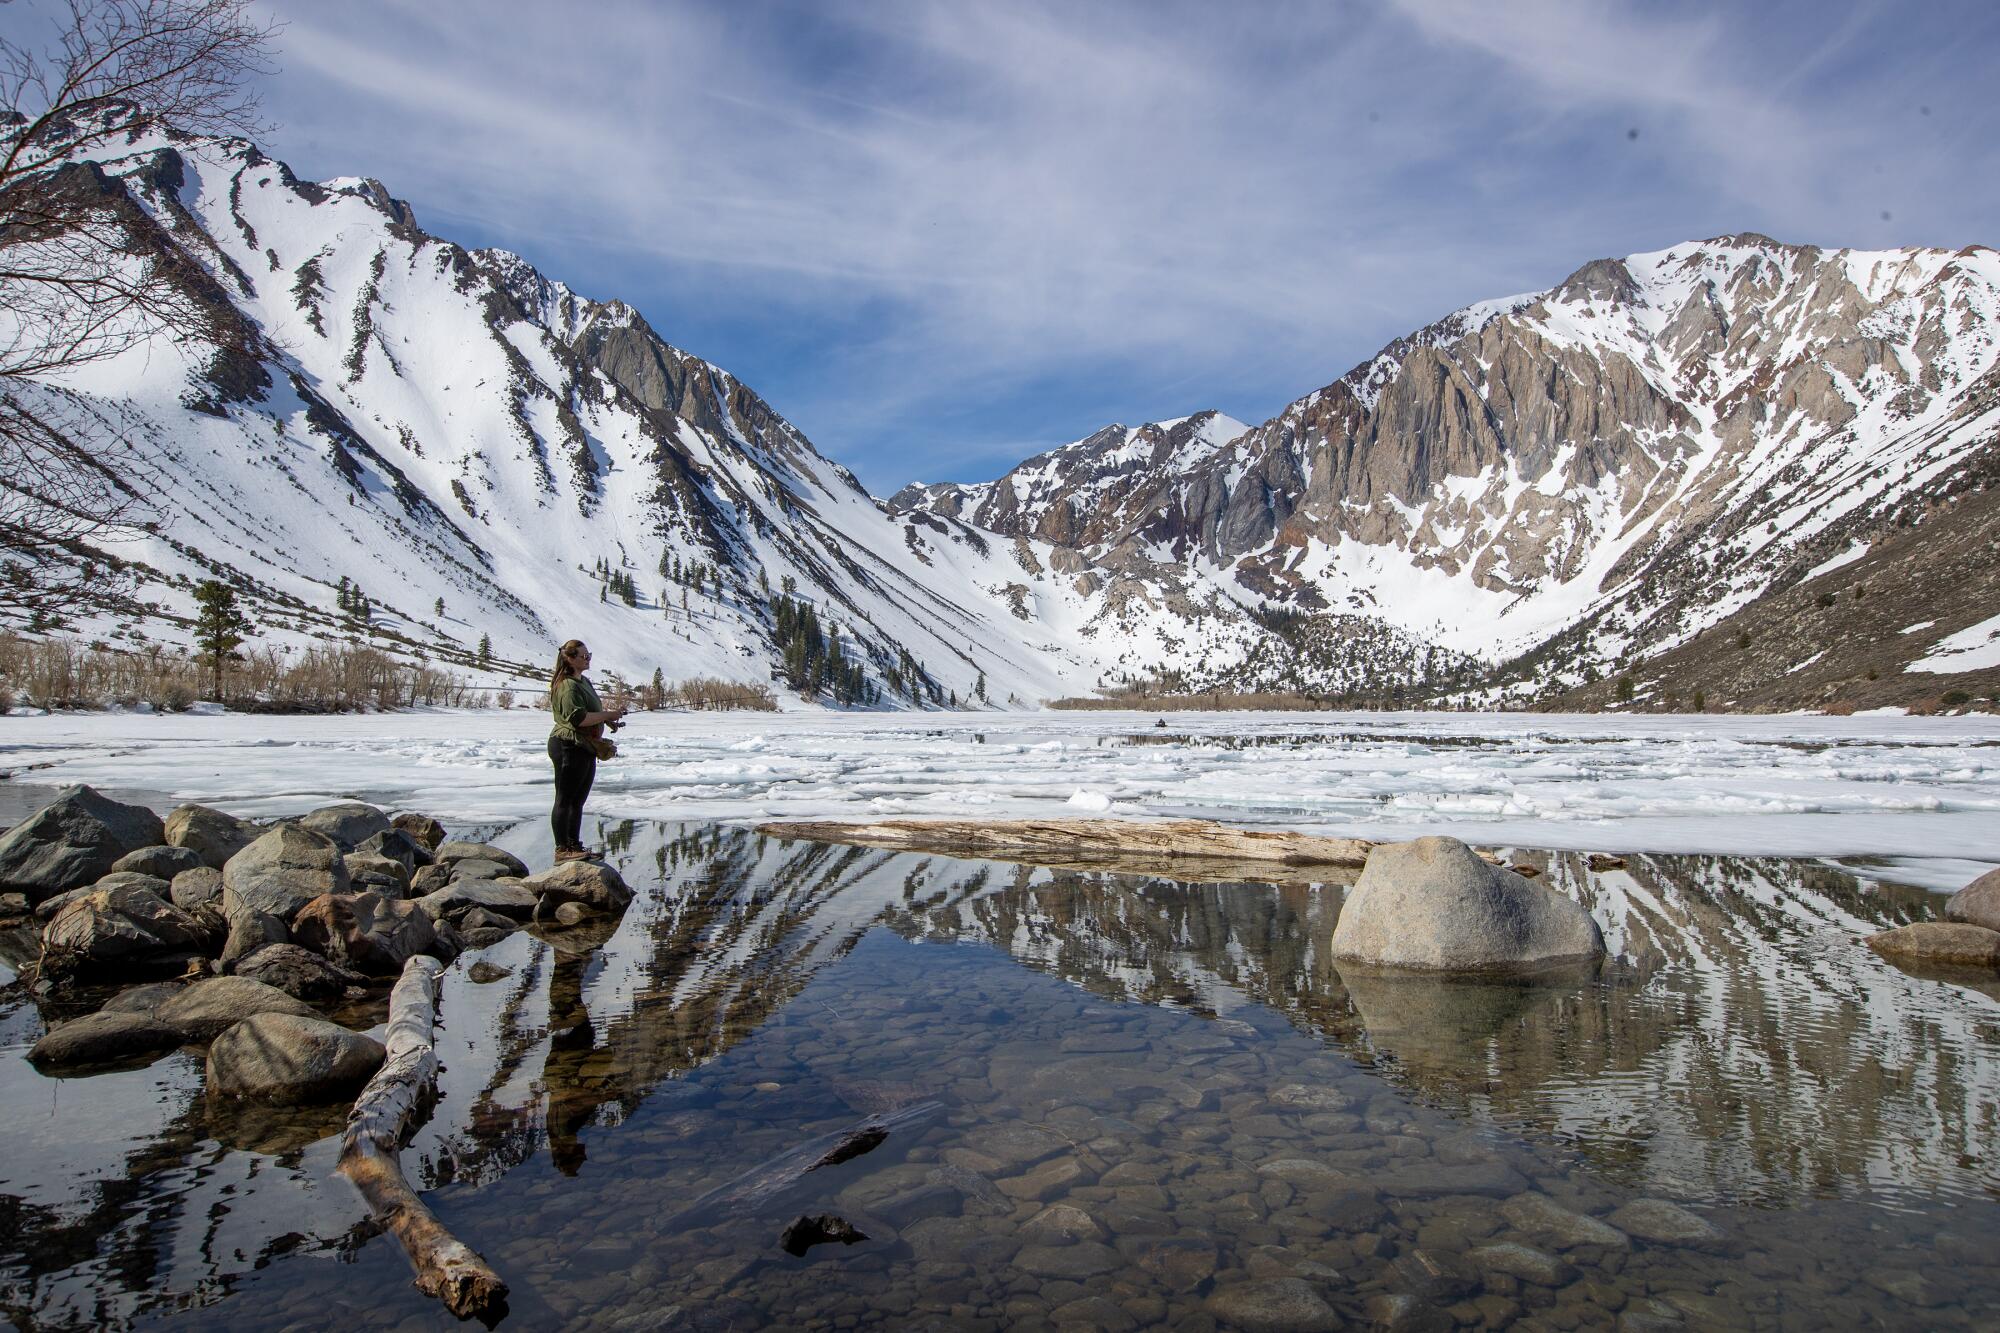 A woman casts a line in a lake surrounded by snowy mountains